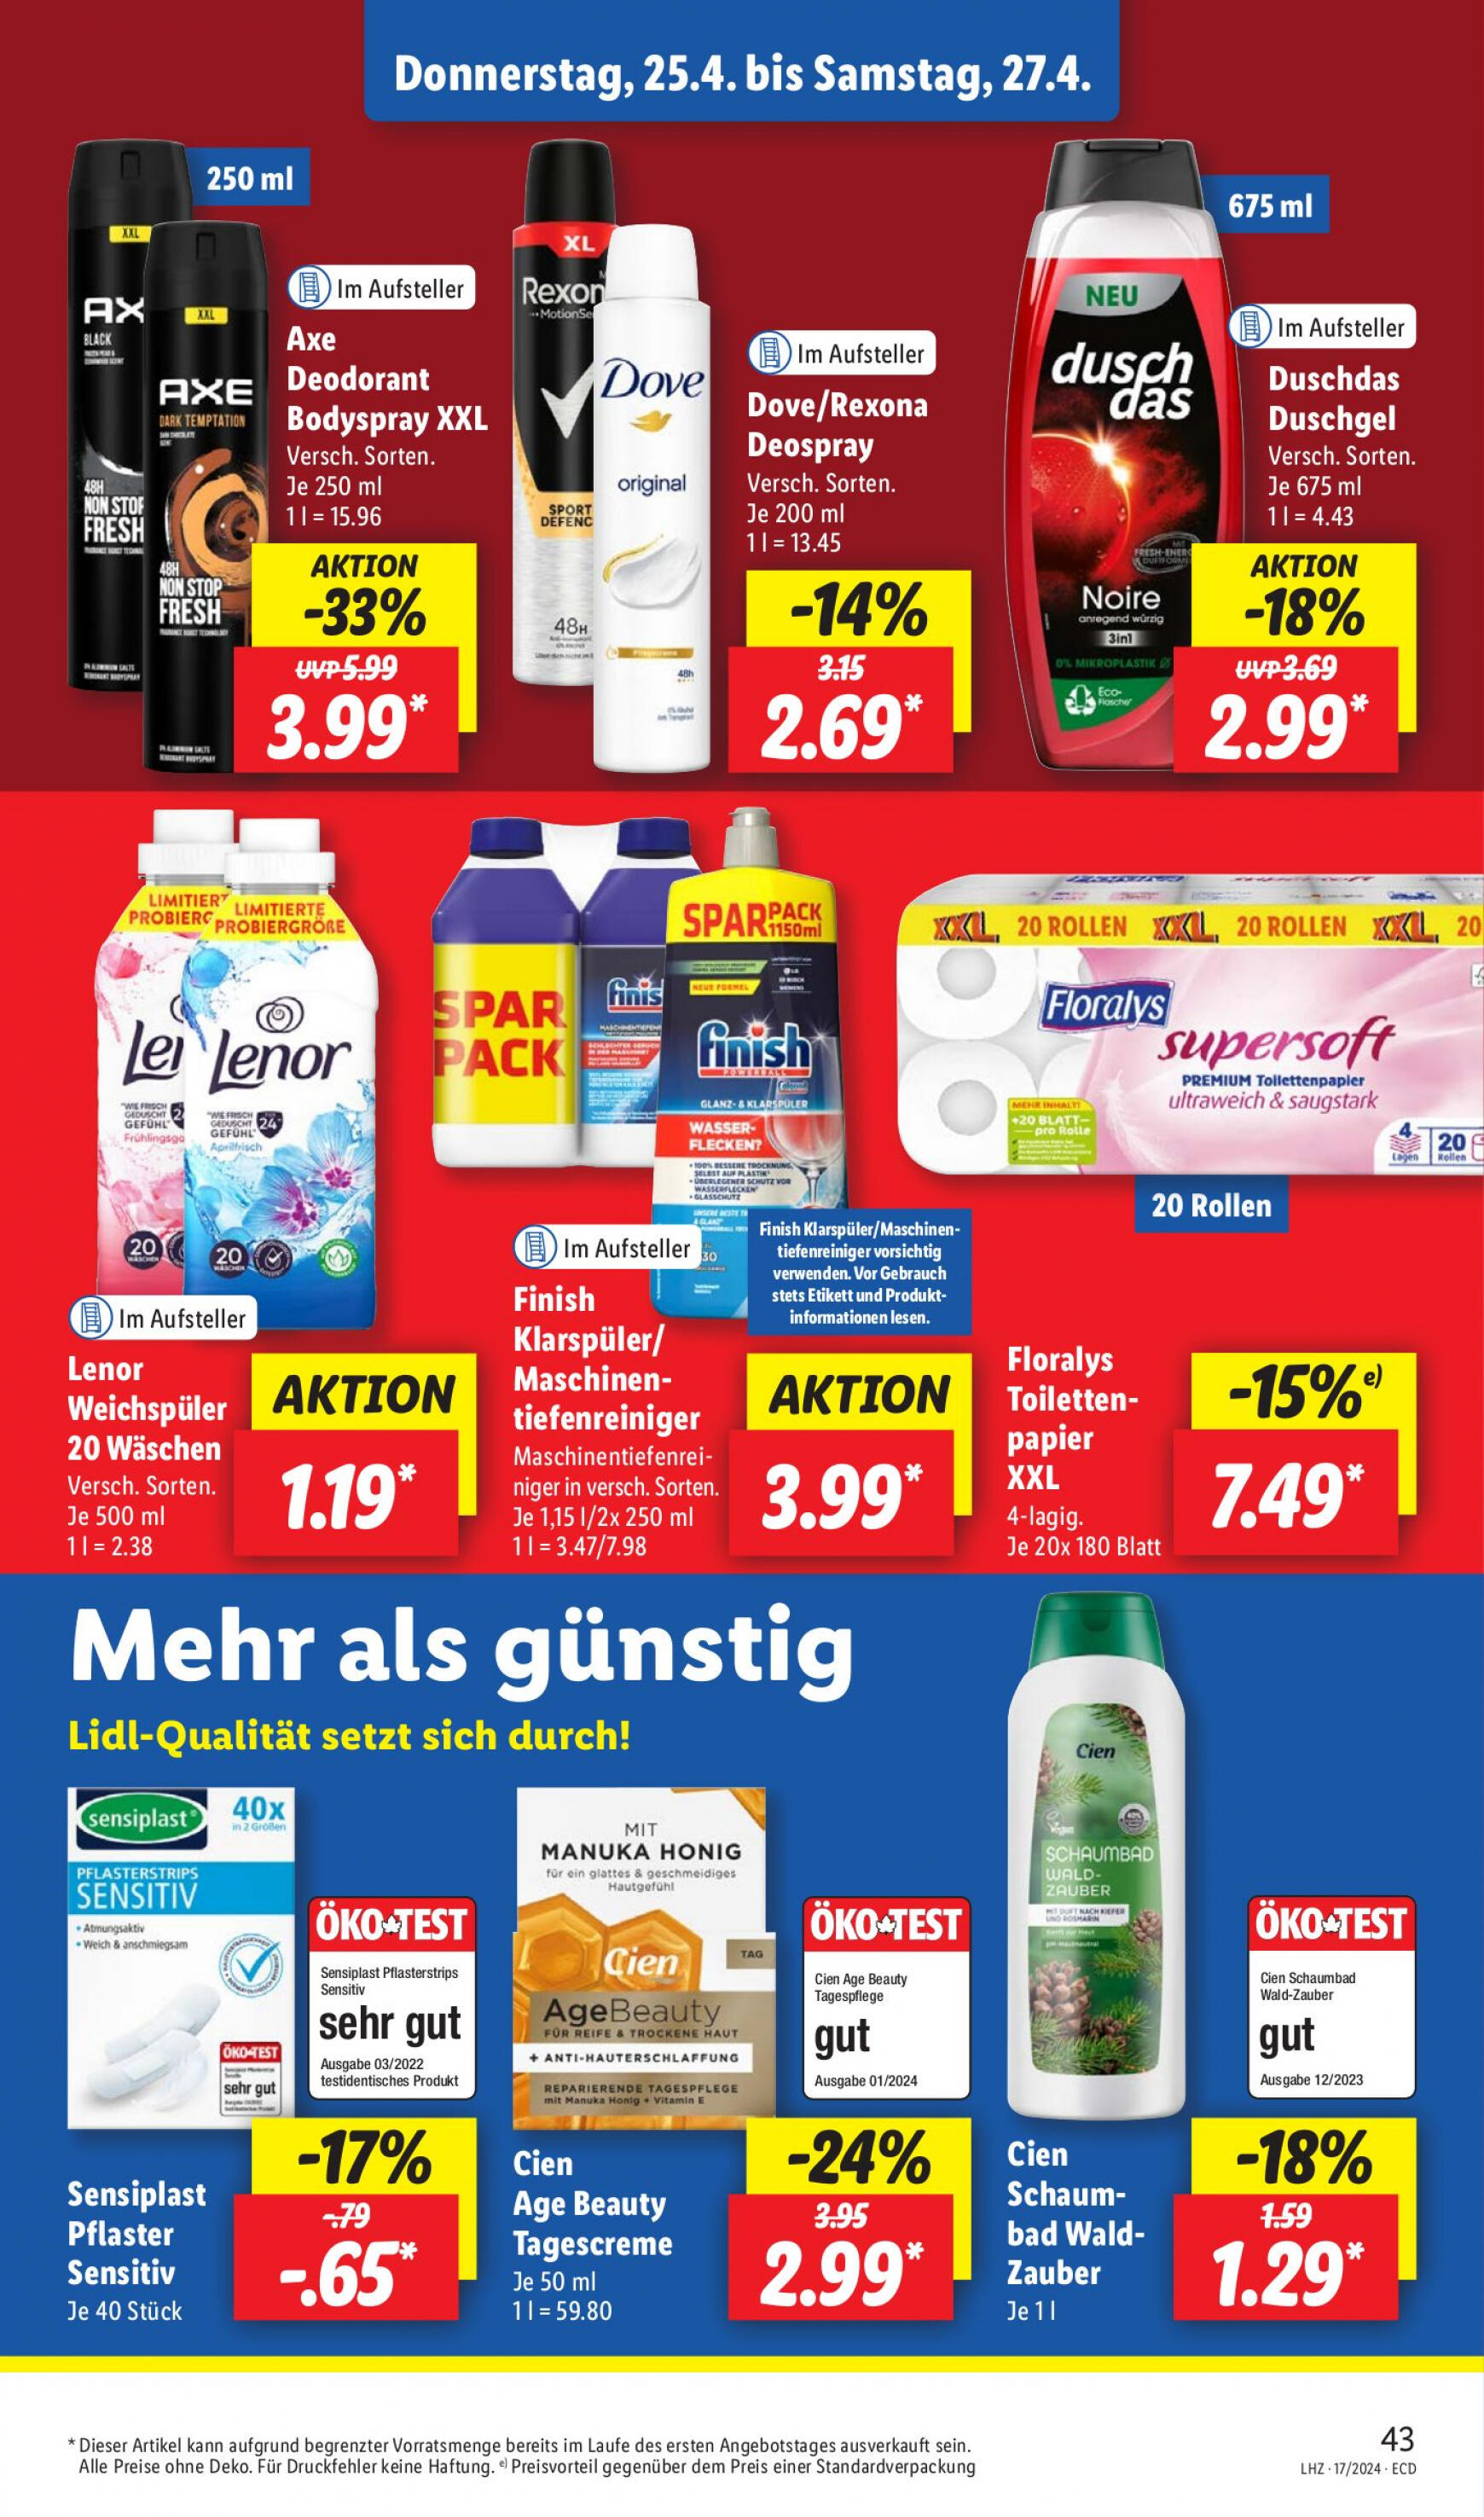 lidl - Flyer Lidl aktuell 22.04. - 27.04. - page: 53